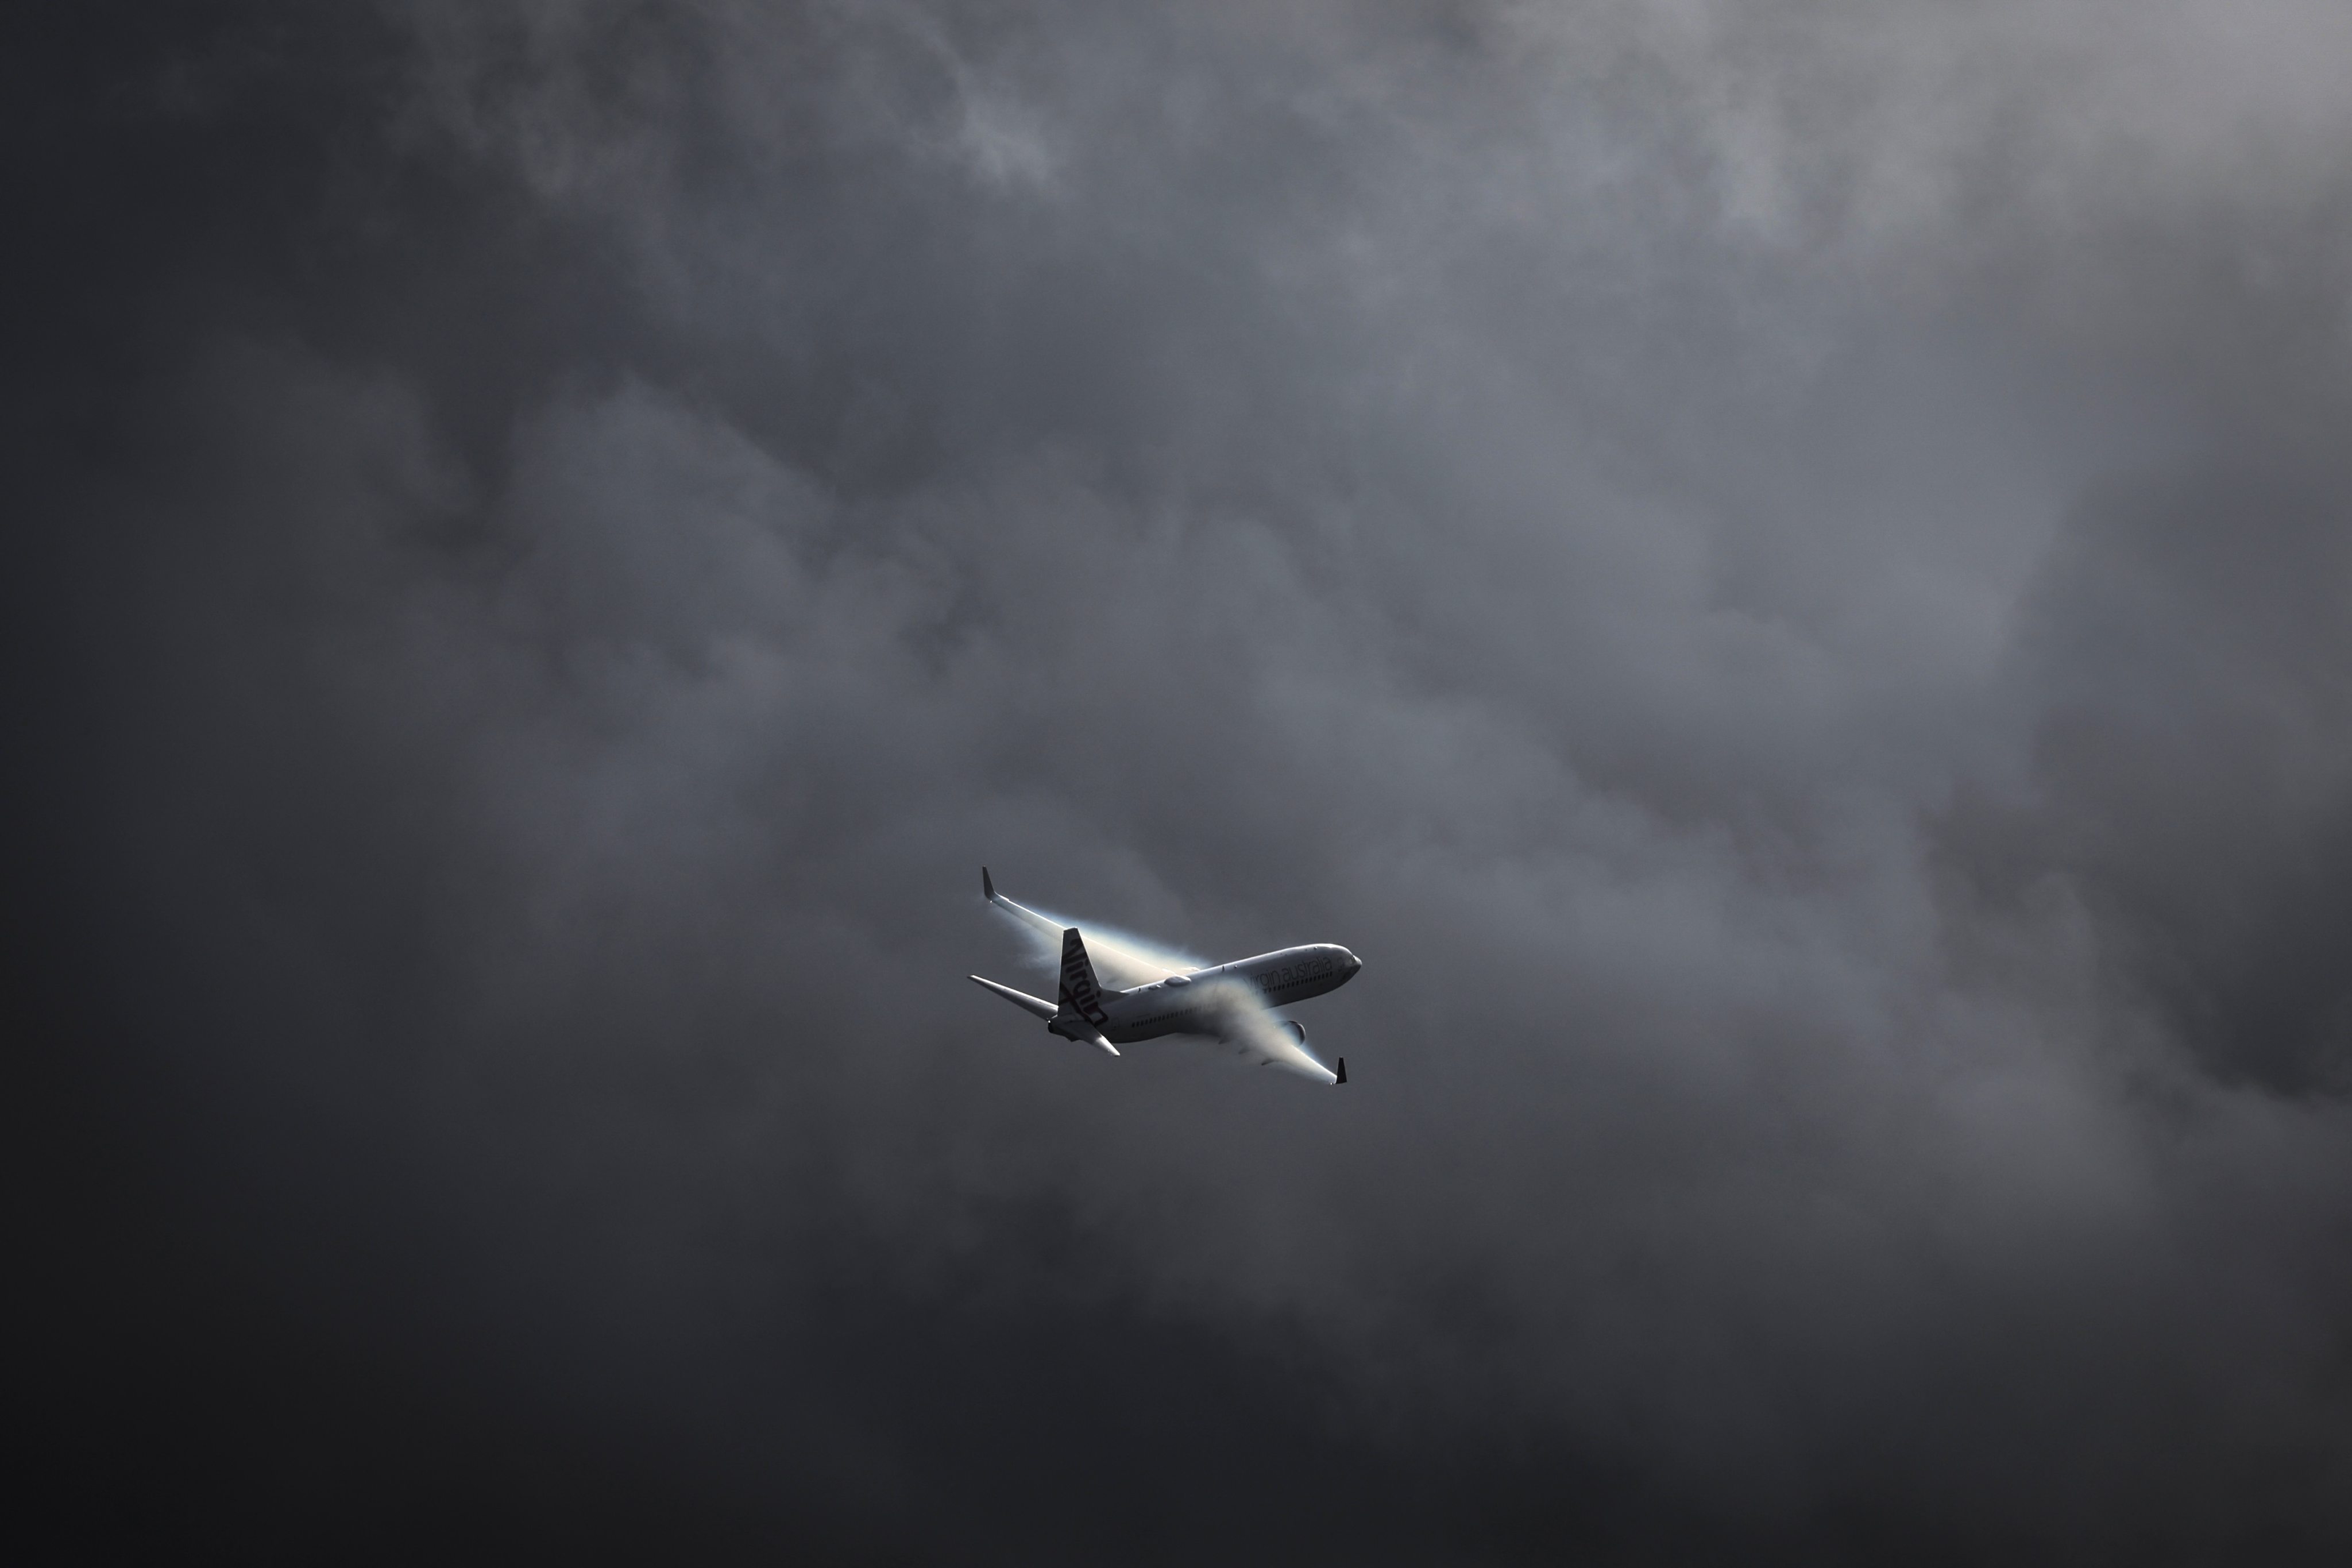 A passenger plane flies above Sydney International Airport as a storm approaches. The labour crisis on the ground is adding risk in the air during the post-Covid travel boom. Photo: AFP